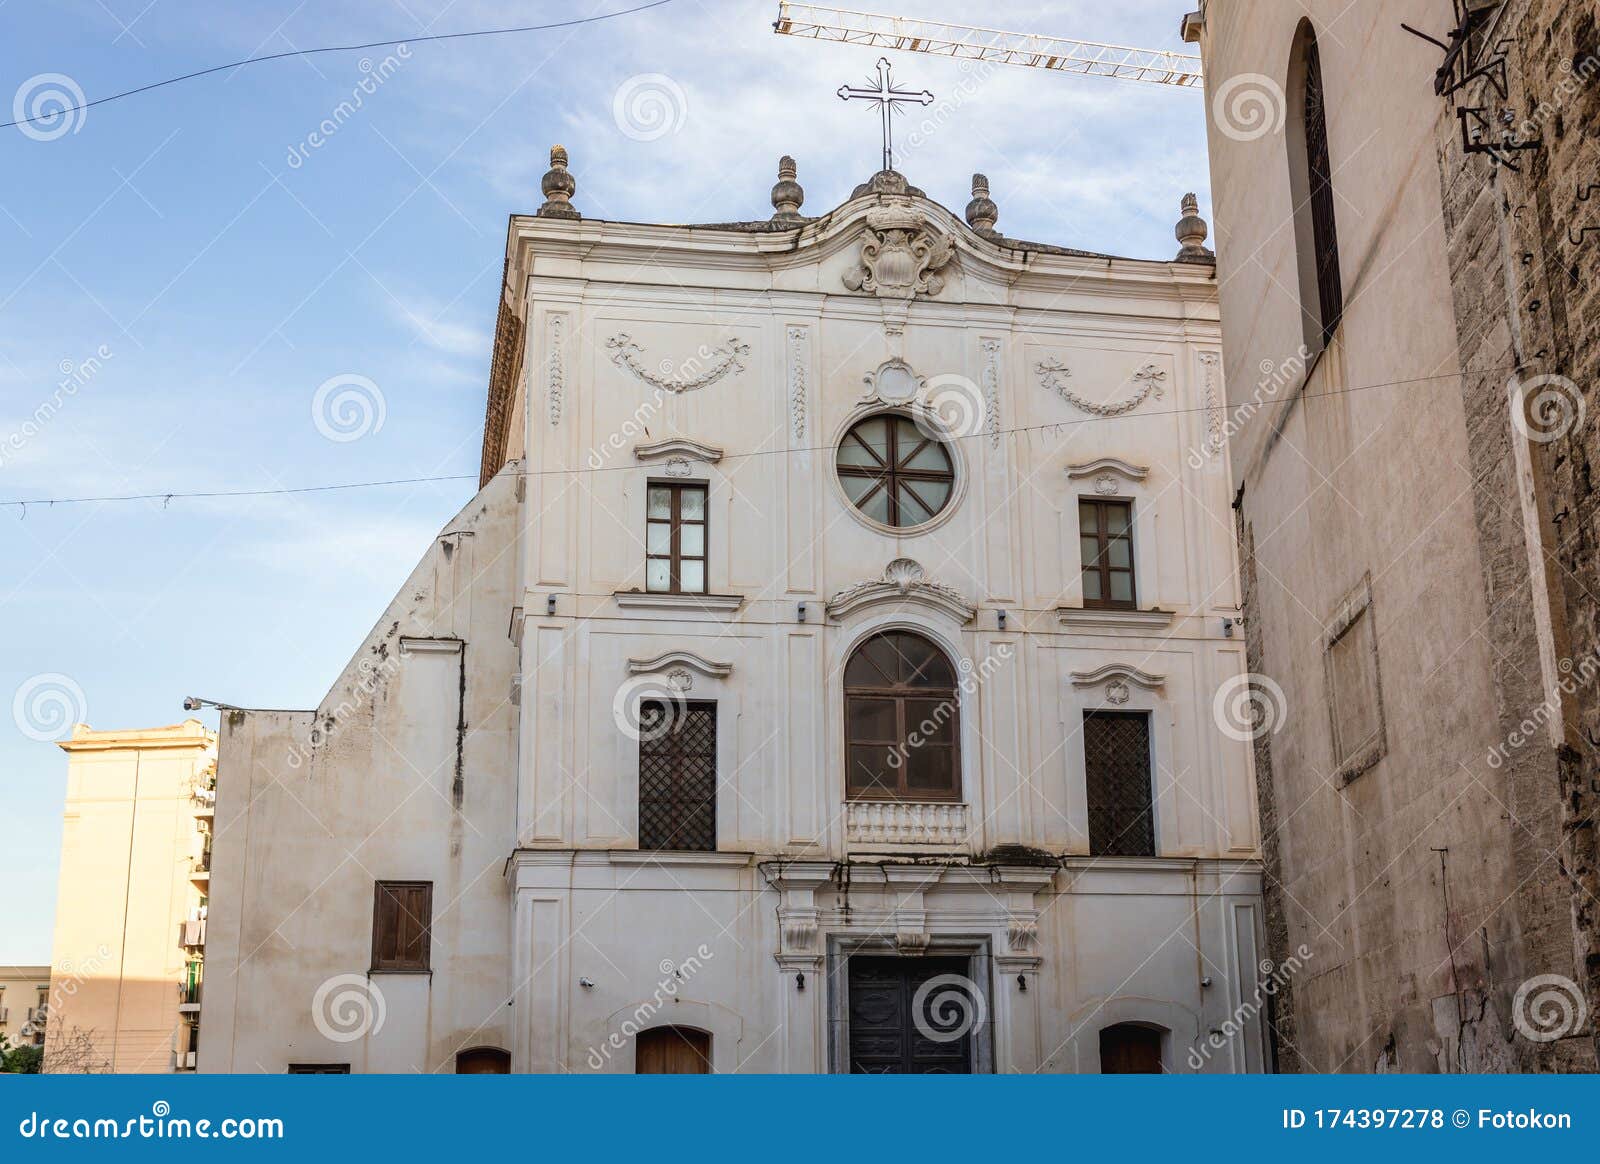 building in palermo